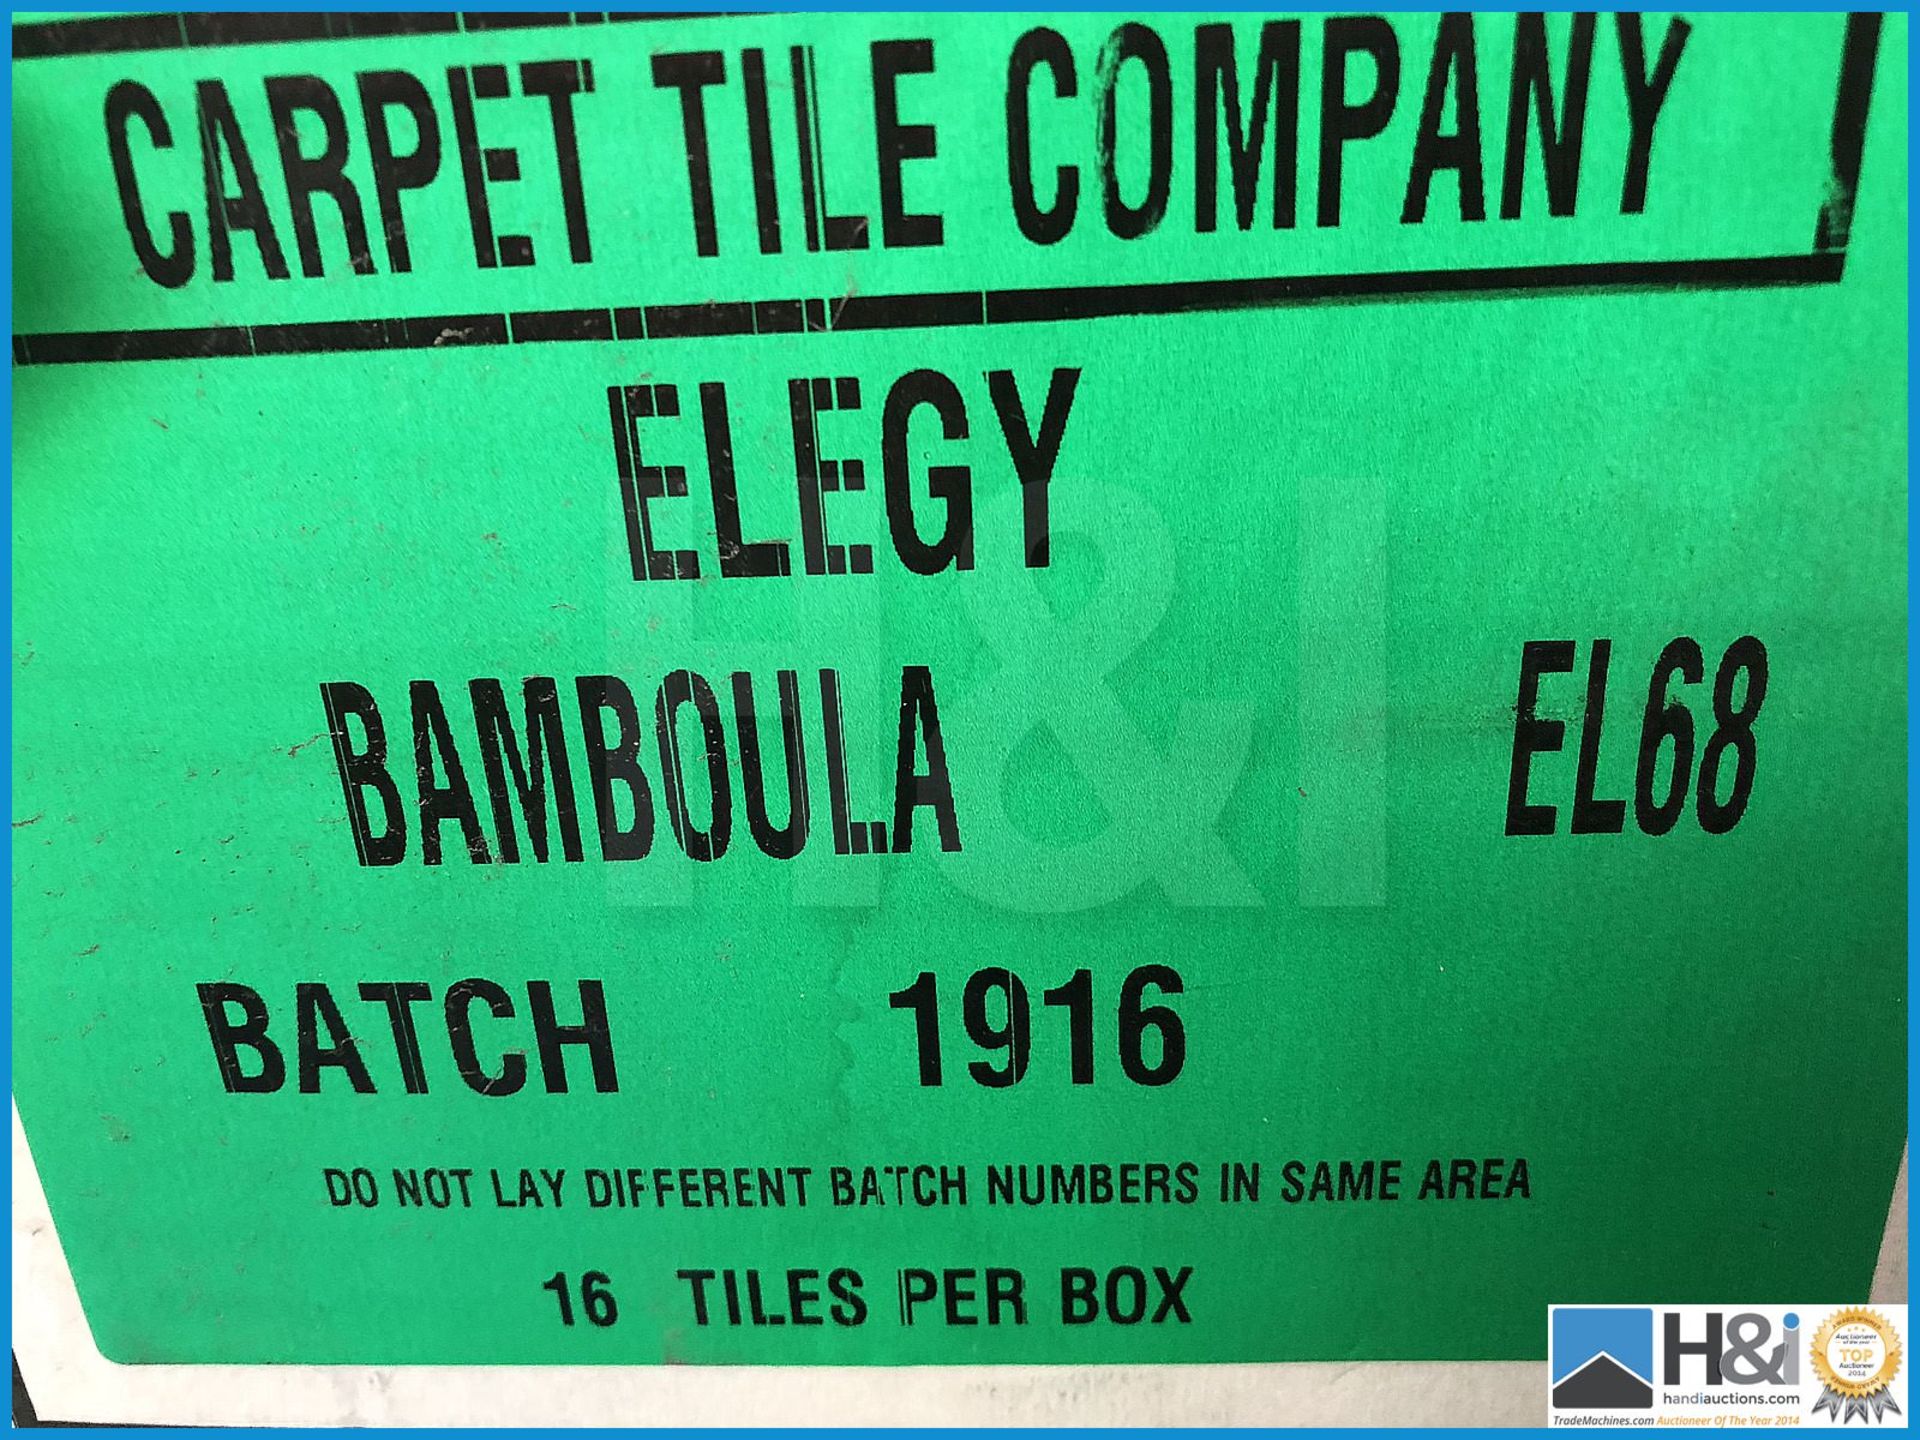 10 boxes of 16 tiles per box. Brand new The Carpet Tile Company Elegy Bamboula. Ultra high quality. - Image 7 of 8